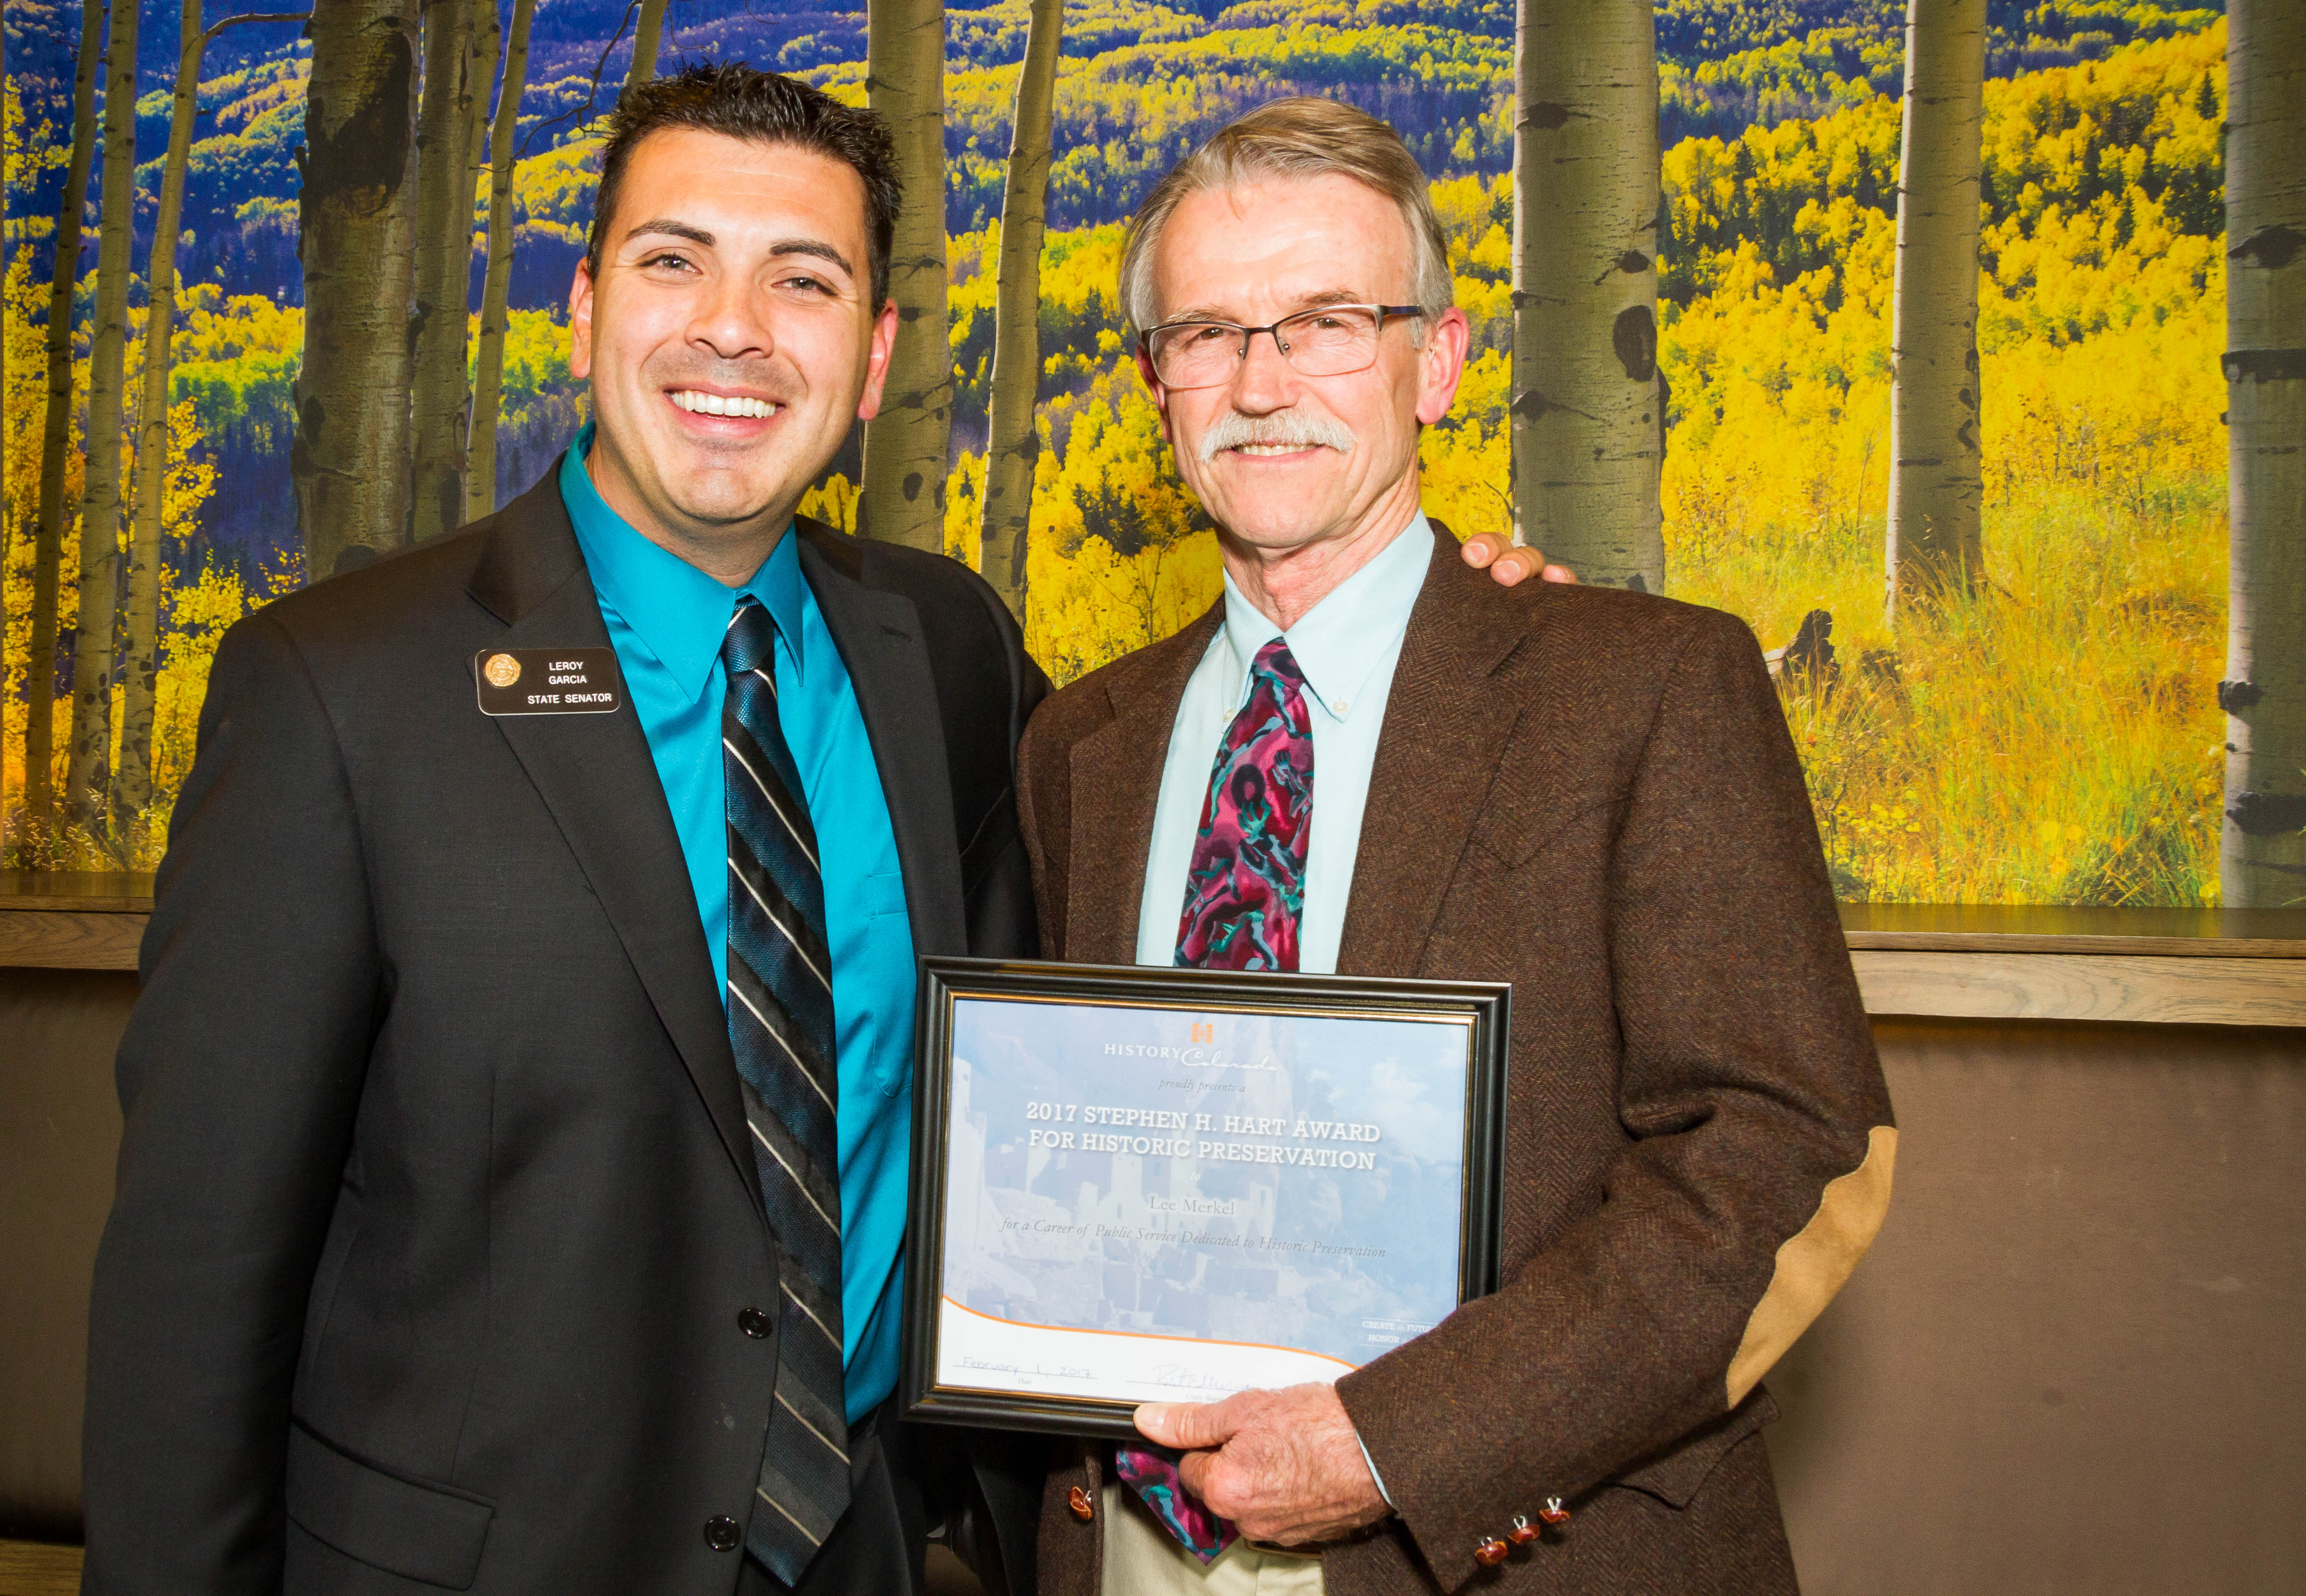 State Senator Leroy Garcia stands next to Lee Merkel, who is holding his recently received Hart Award certificate.